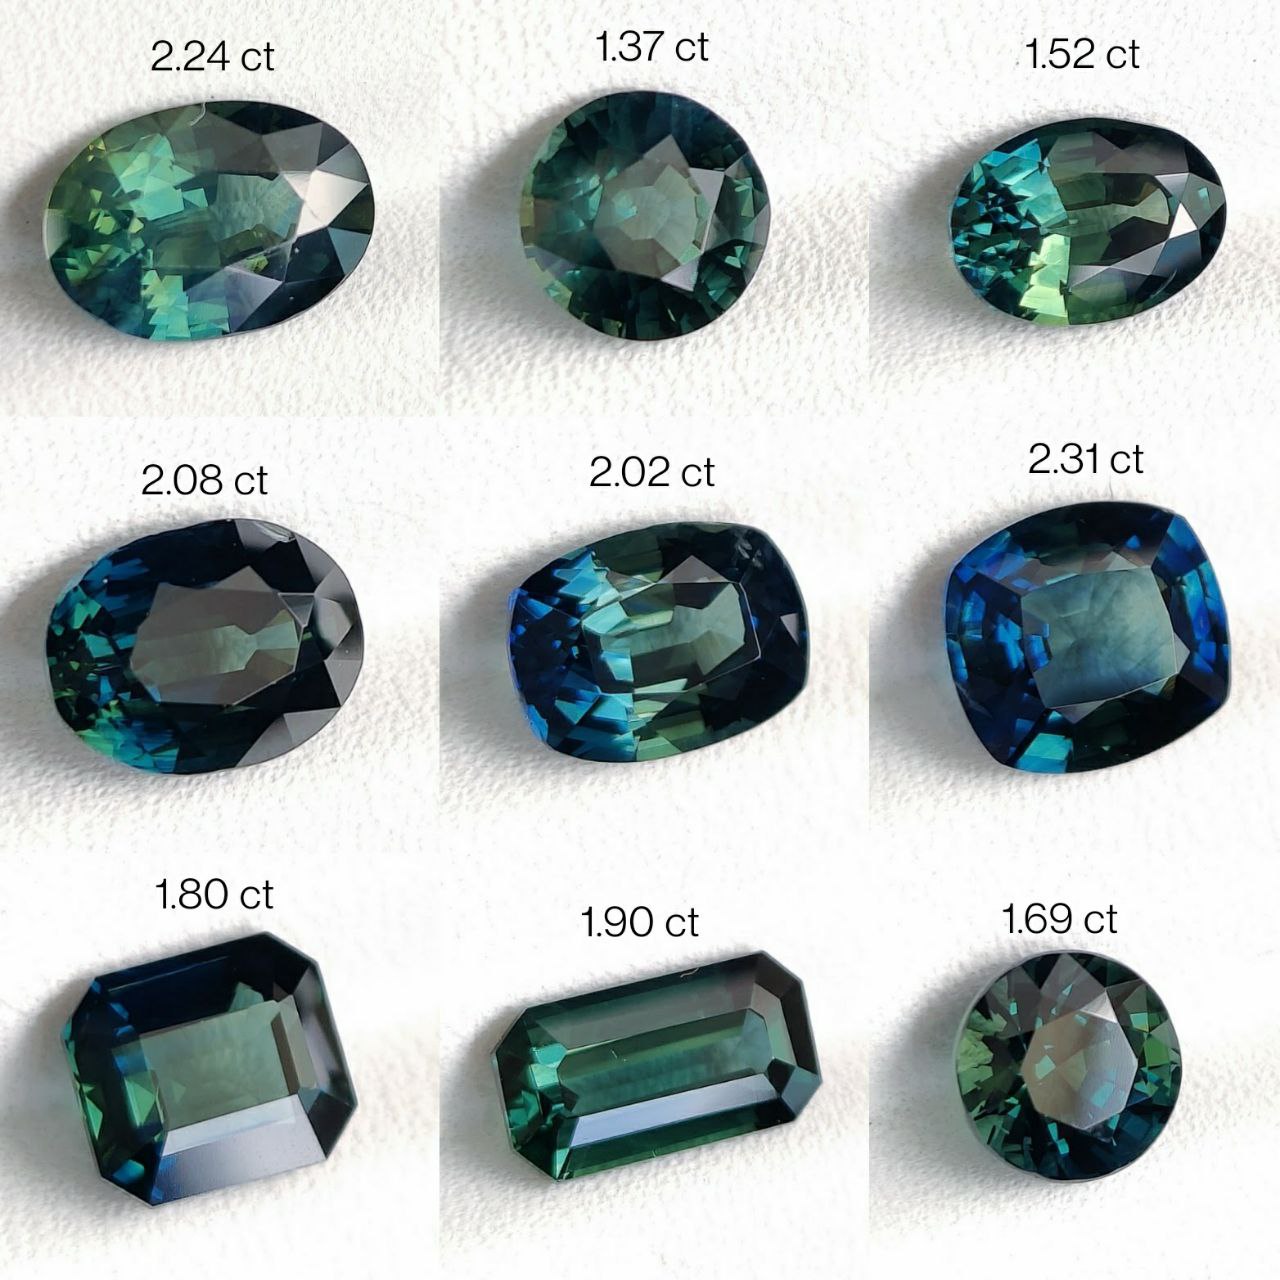 Australian teal and mermaid sapphire lot that demonstrated the bluish-green hue.